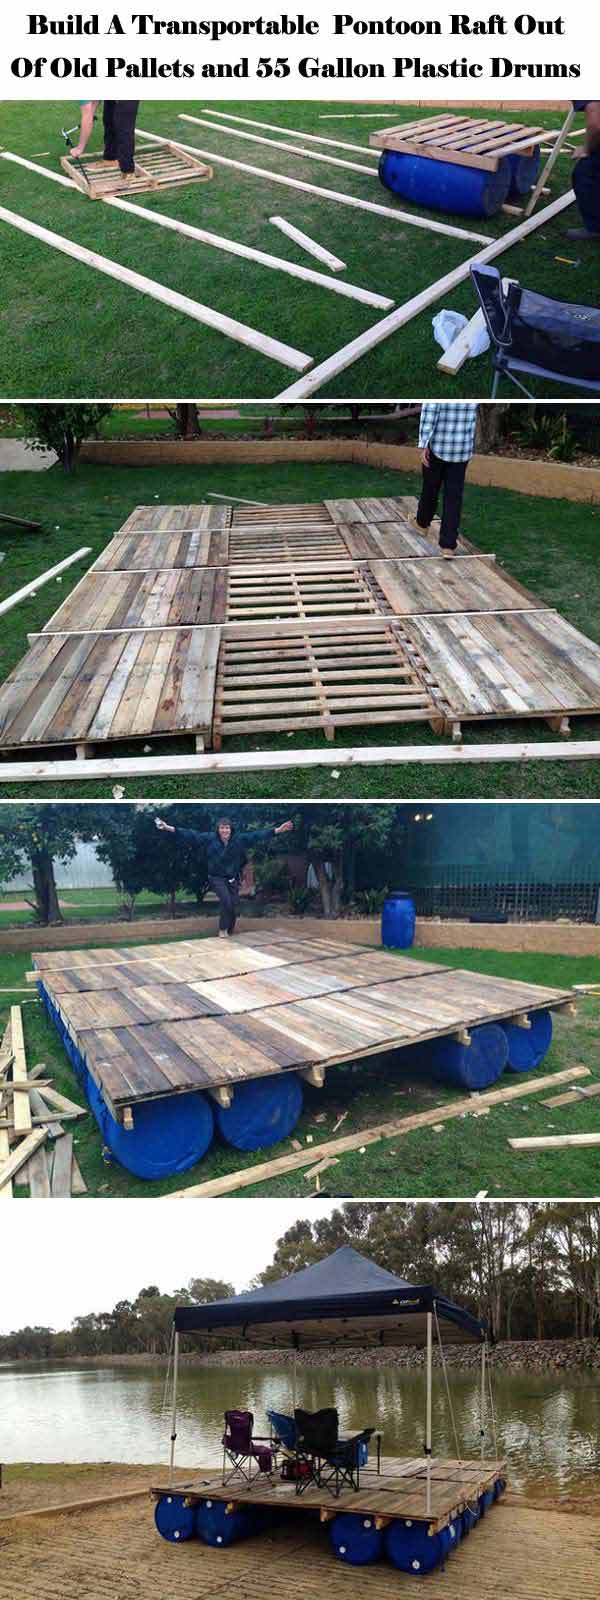 Transportable pontoon raft out of old pallets